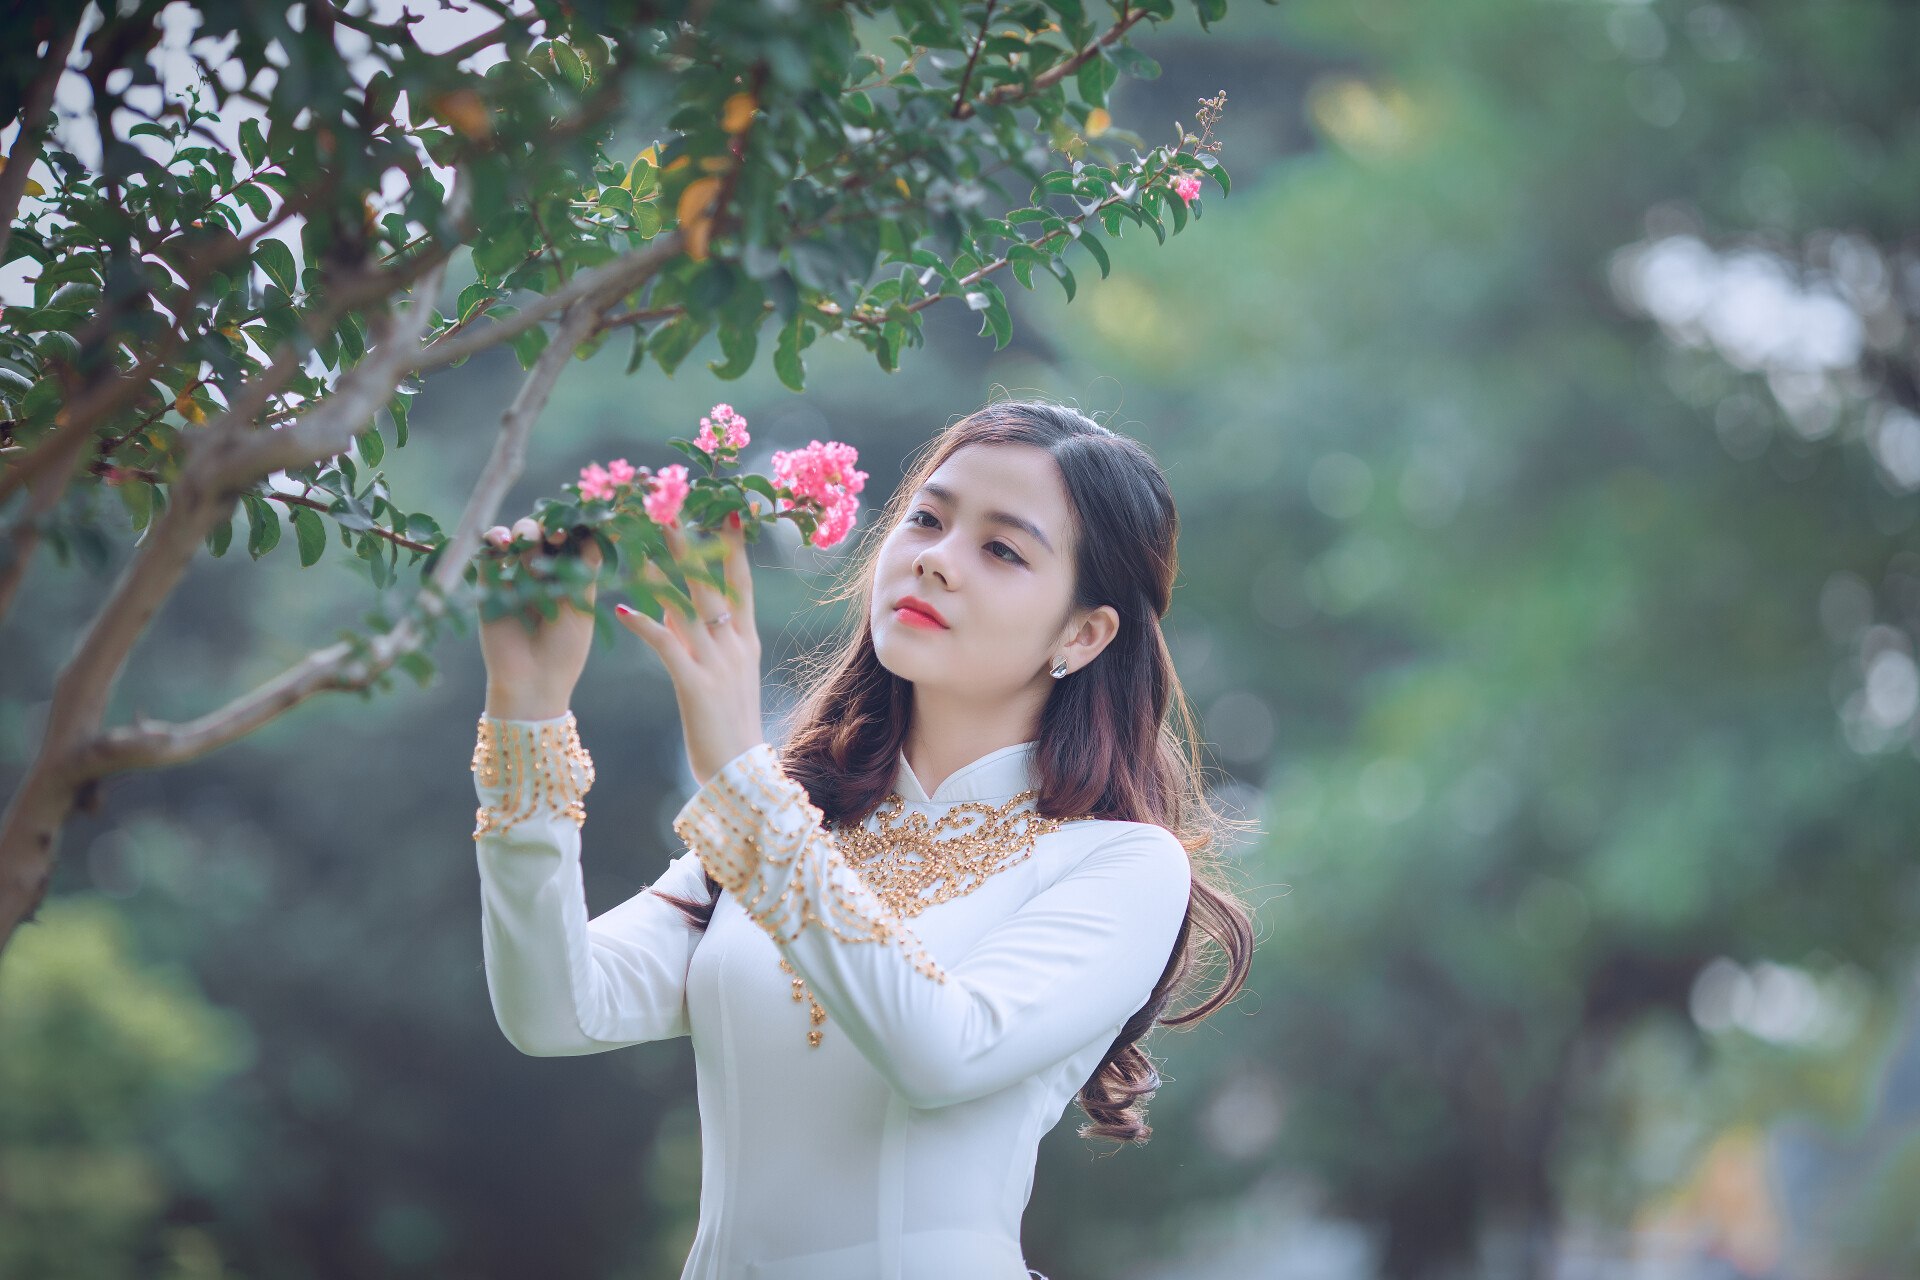 Vietnamese Brides – Are They Good For Marriage?